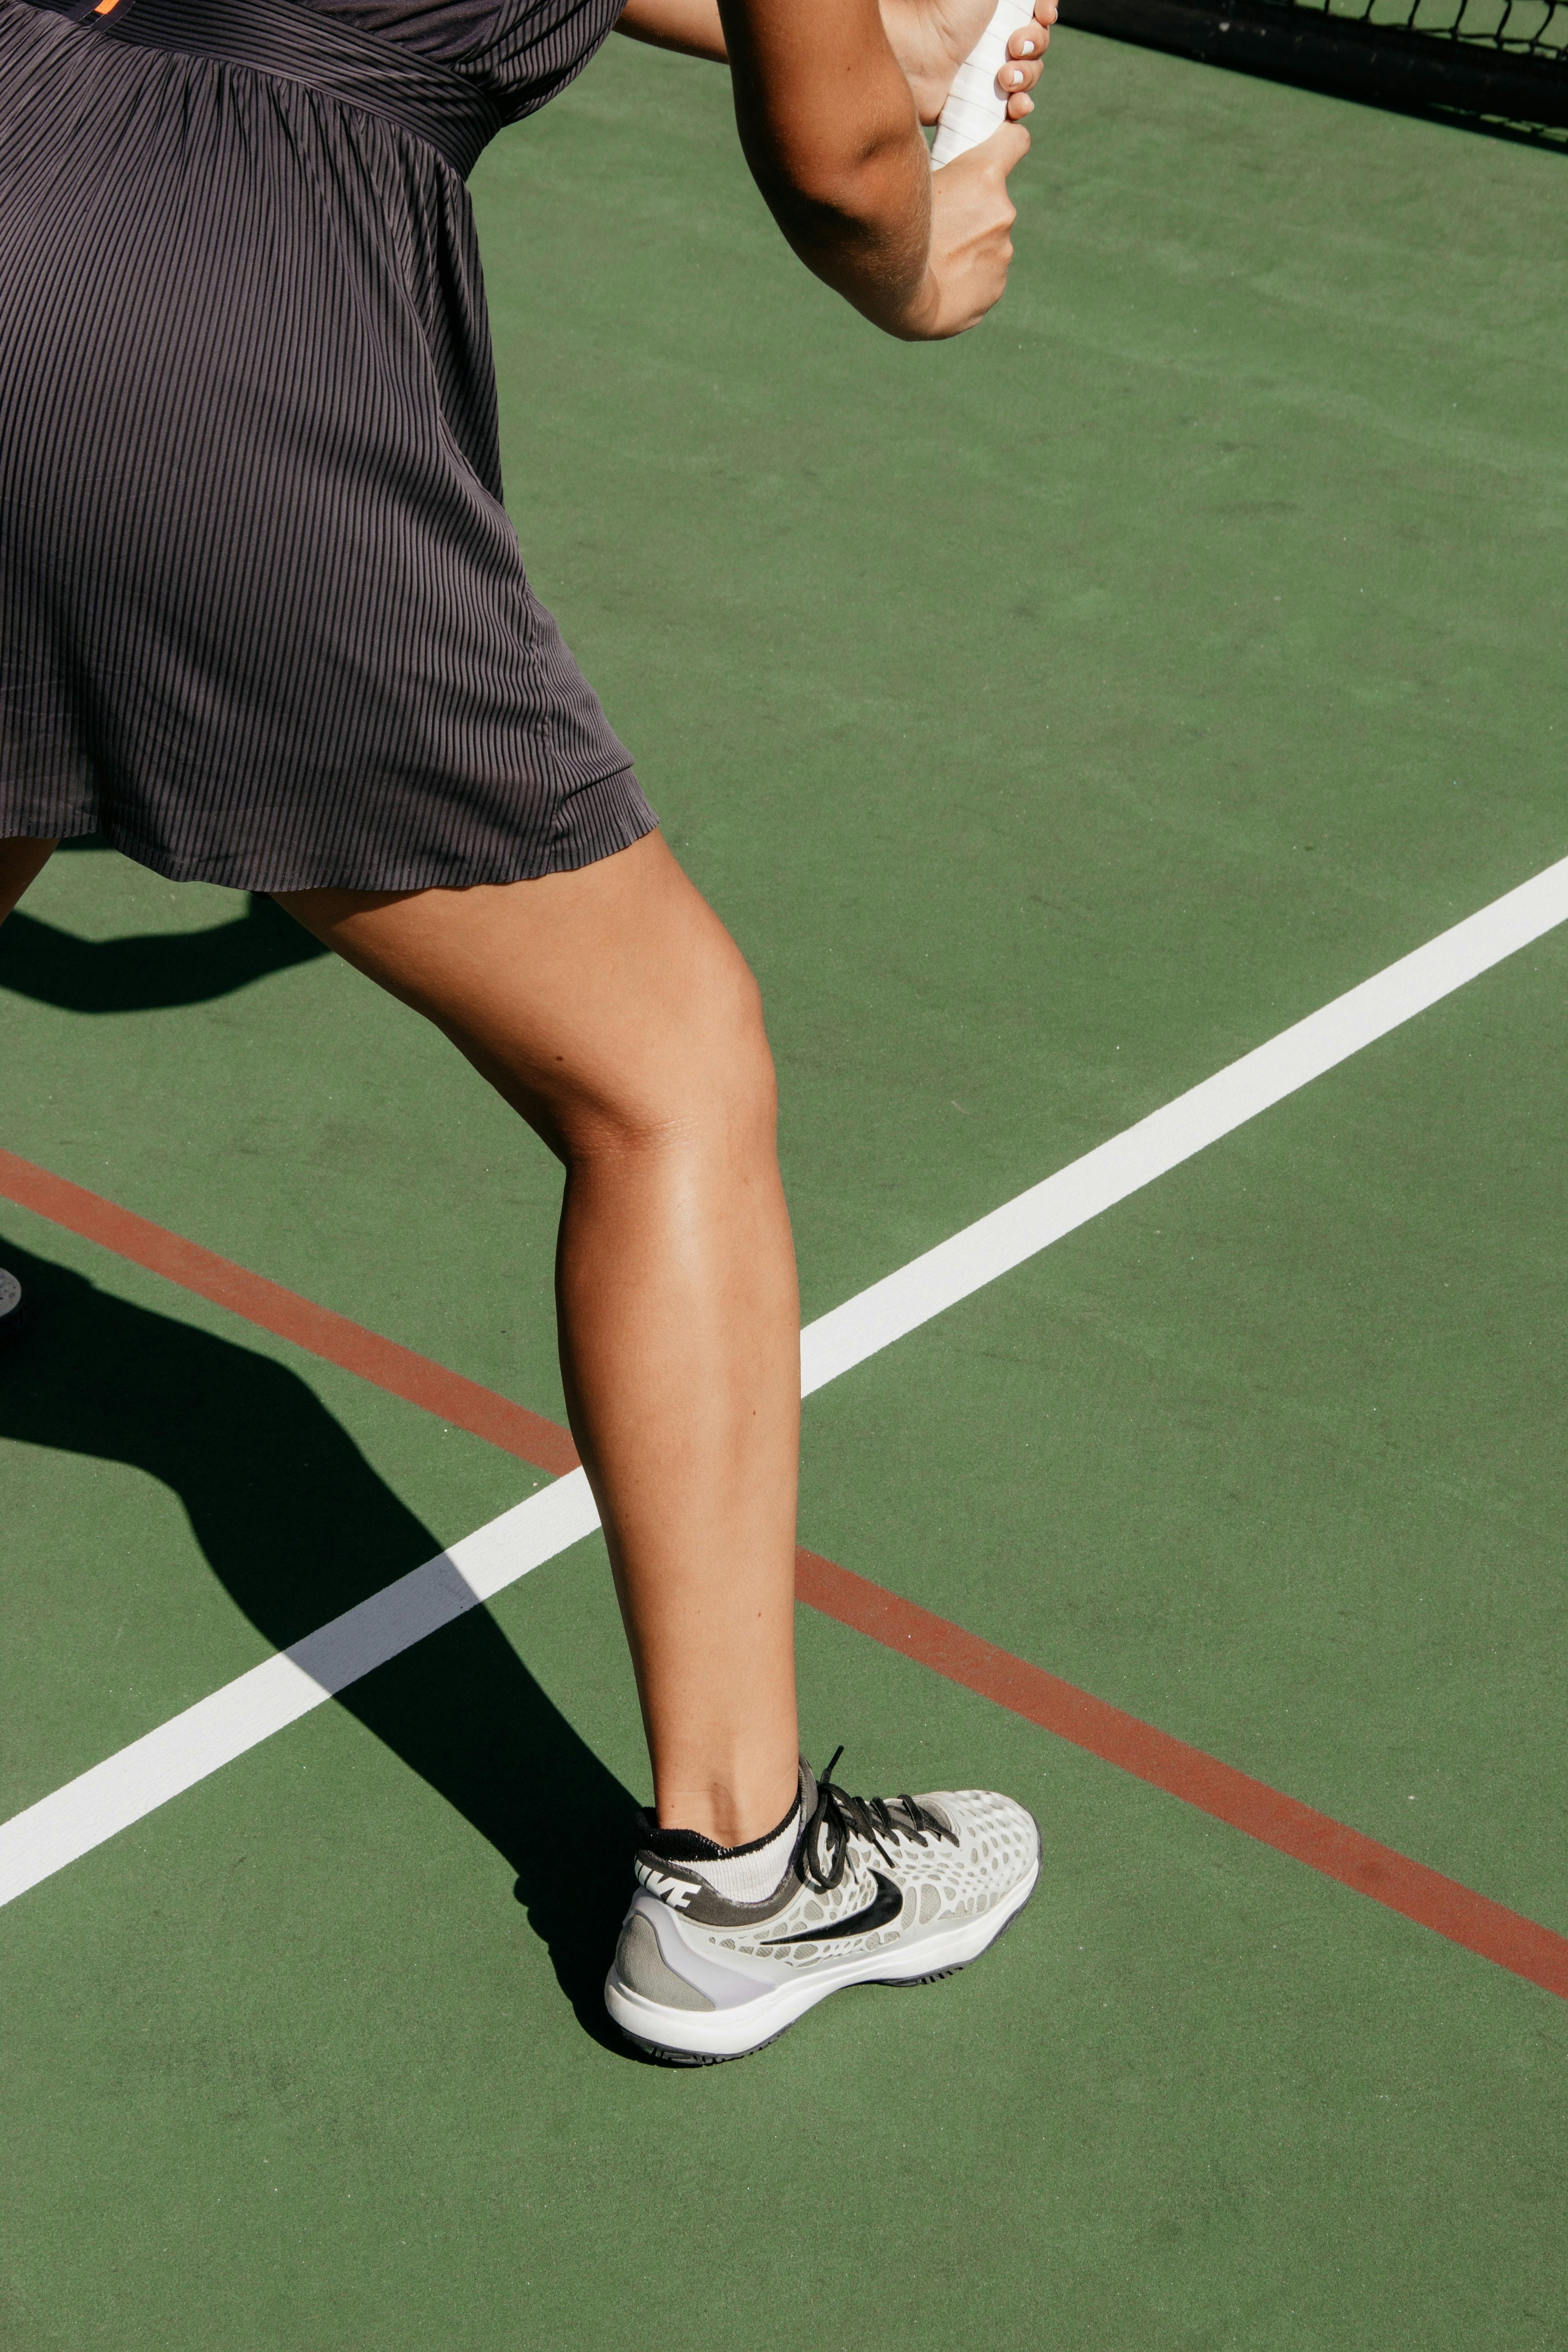 A woman in a tennis dress stands on a hard court in Nike tennis shoes.